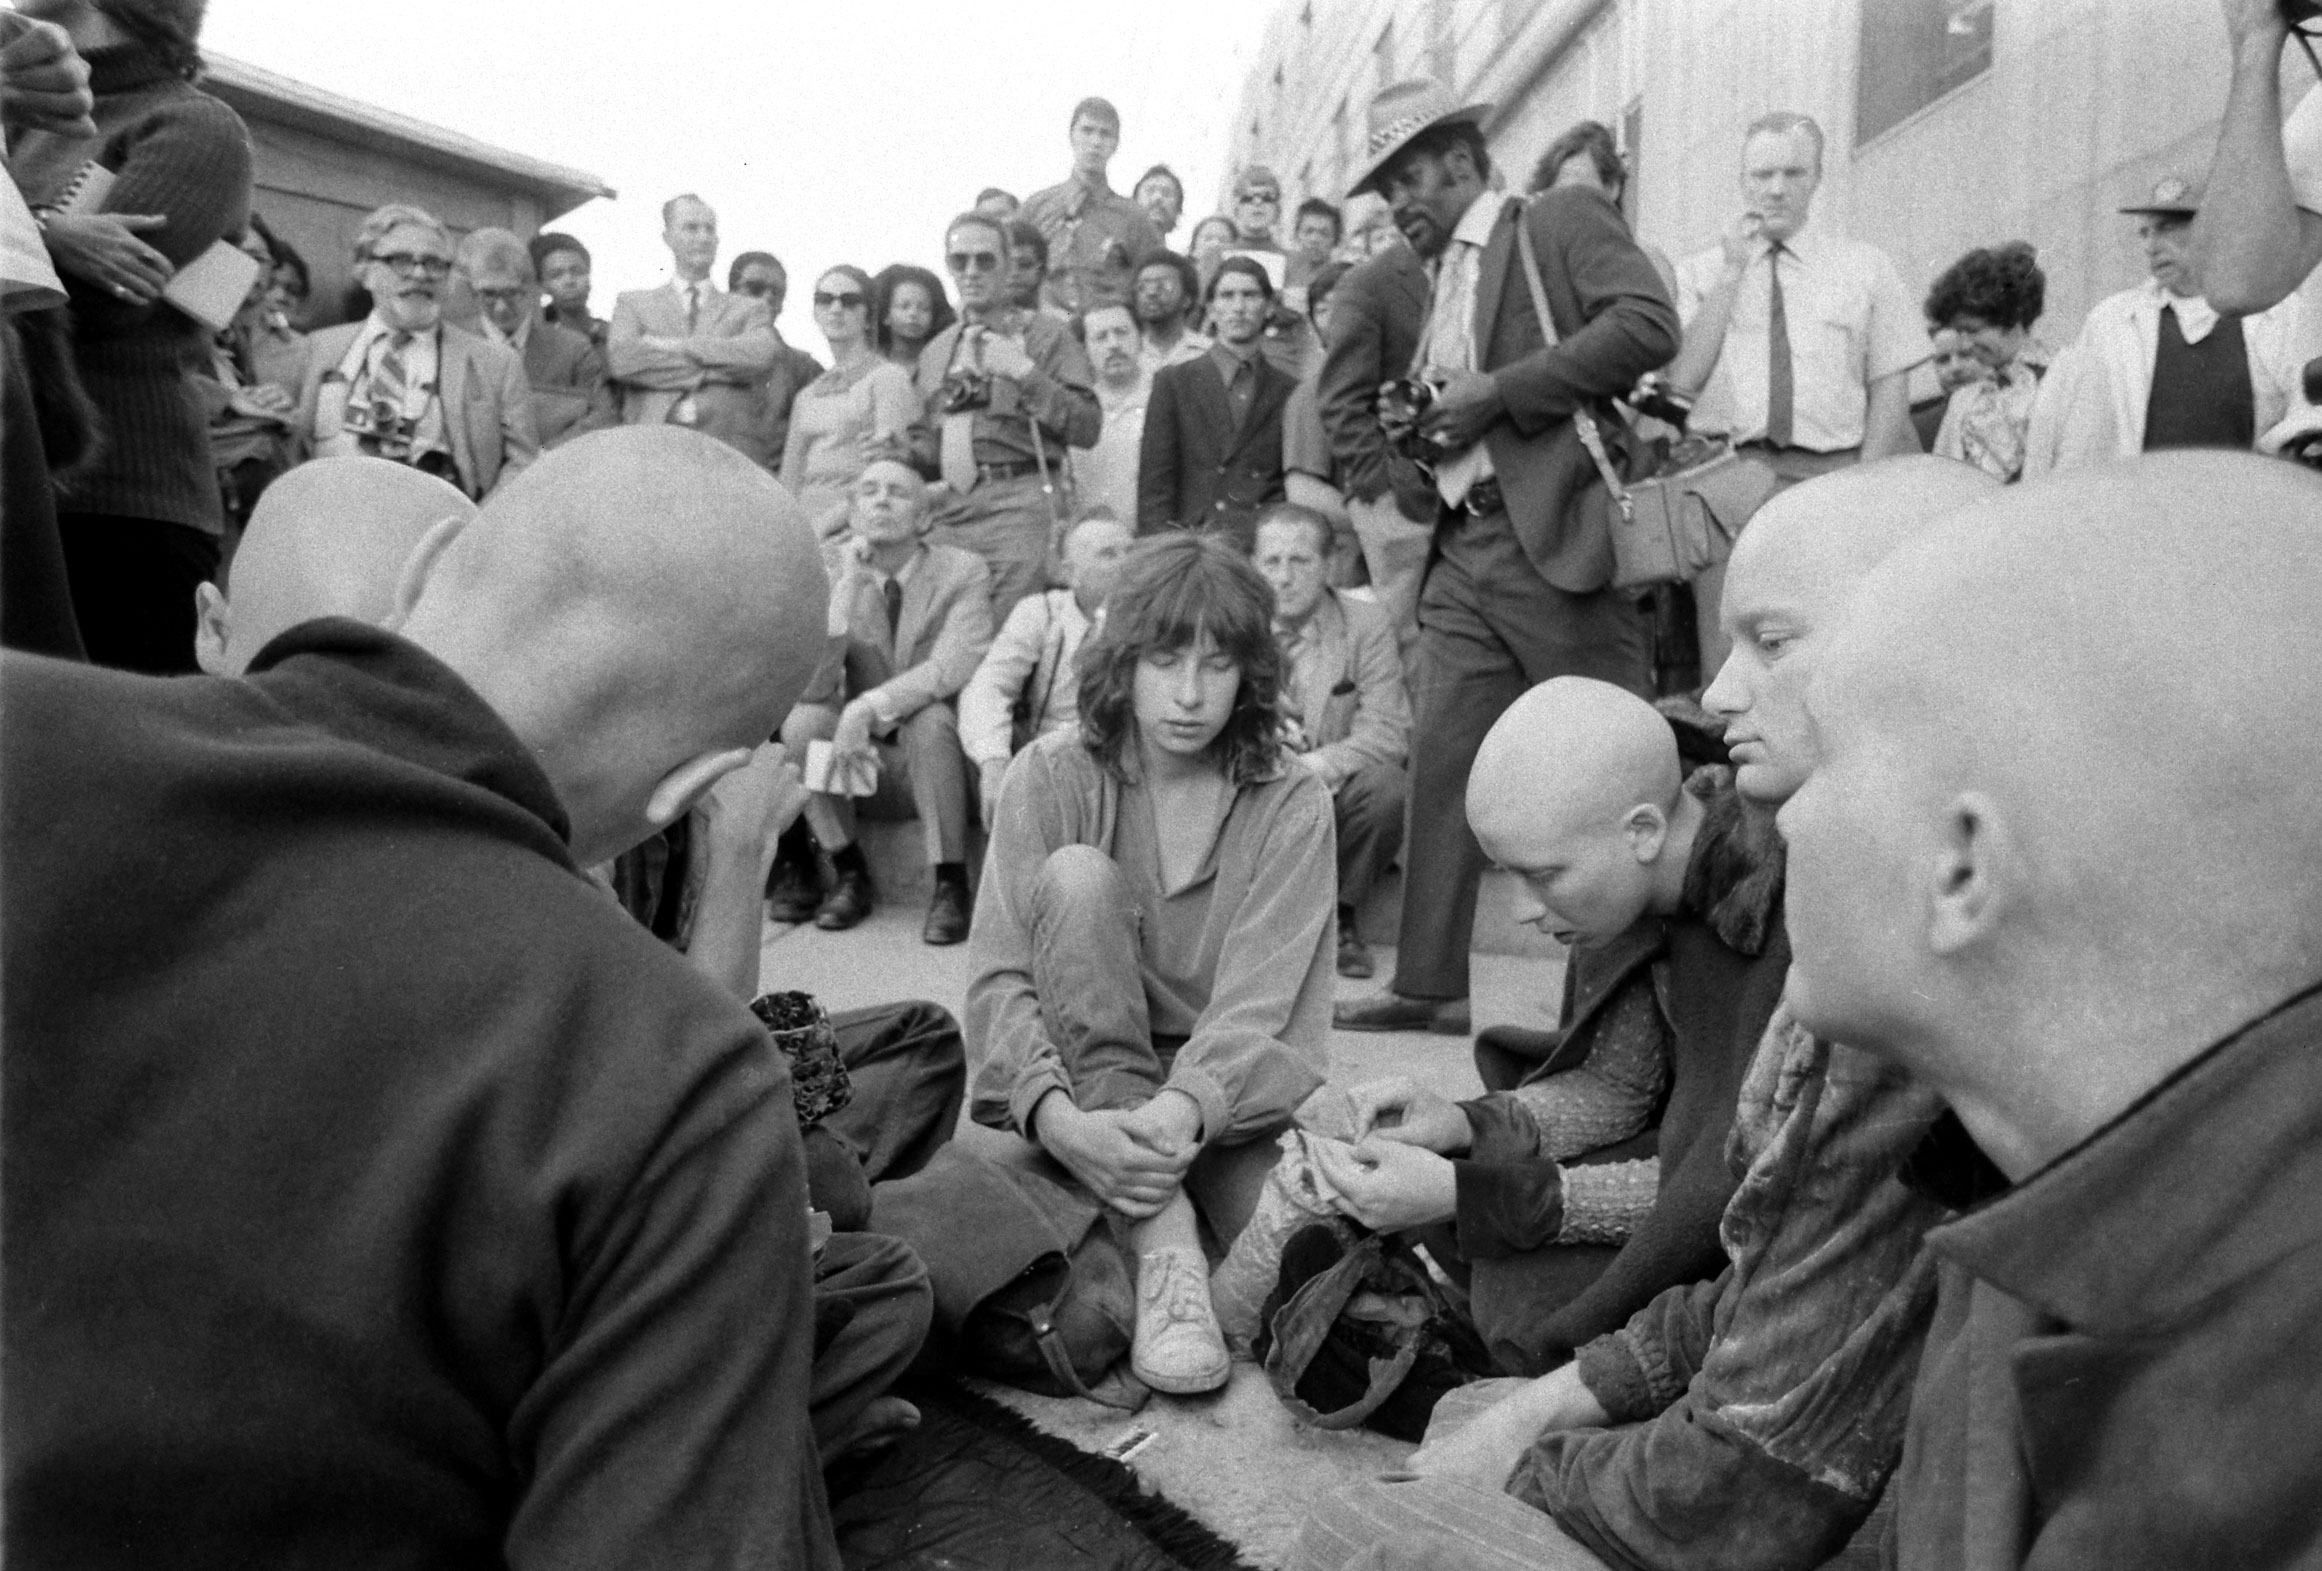 Charles Manson supporters outside the courthouse during his murder trial, Los Angeles, 1970.